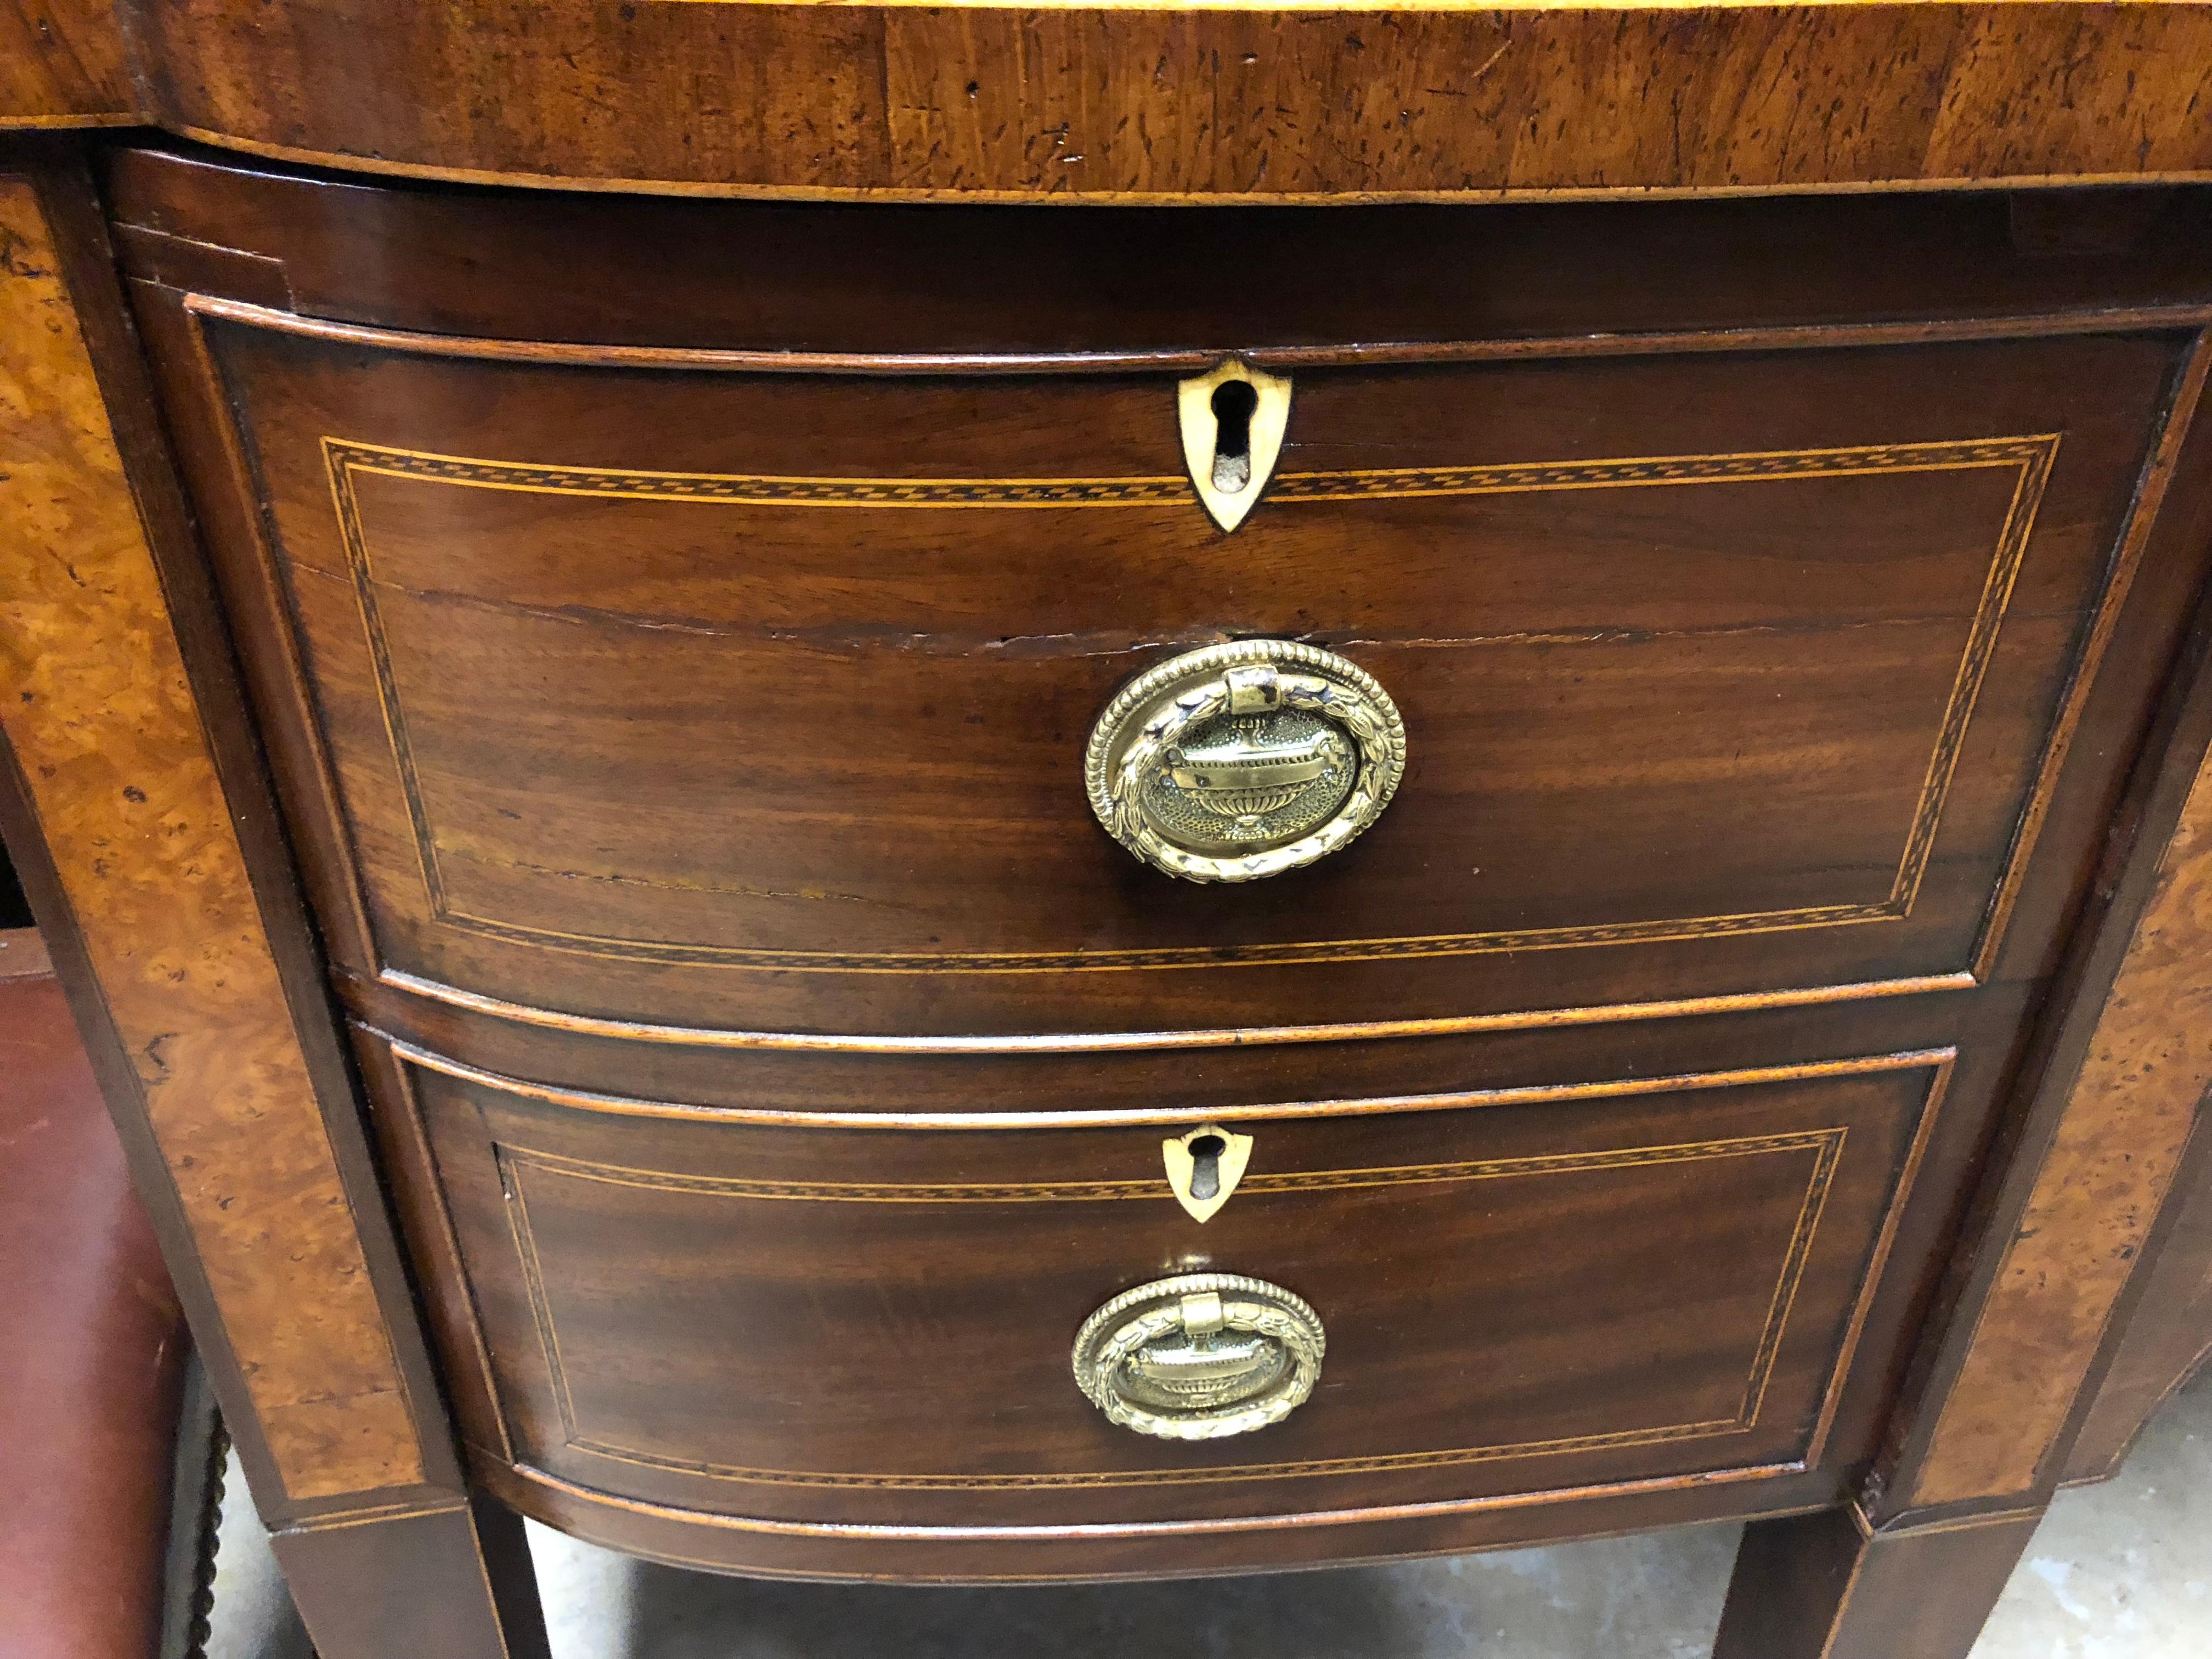 19th Century English Regency Sideboard with Fine Inlays, Escutechons, and Banded Top